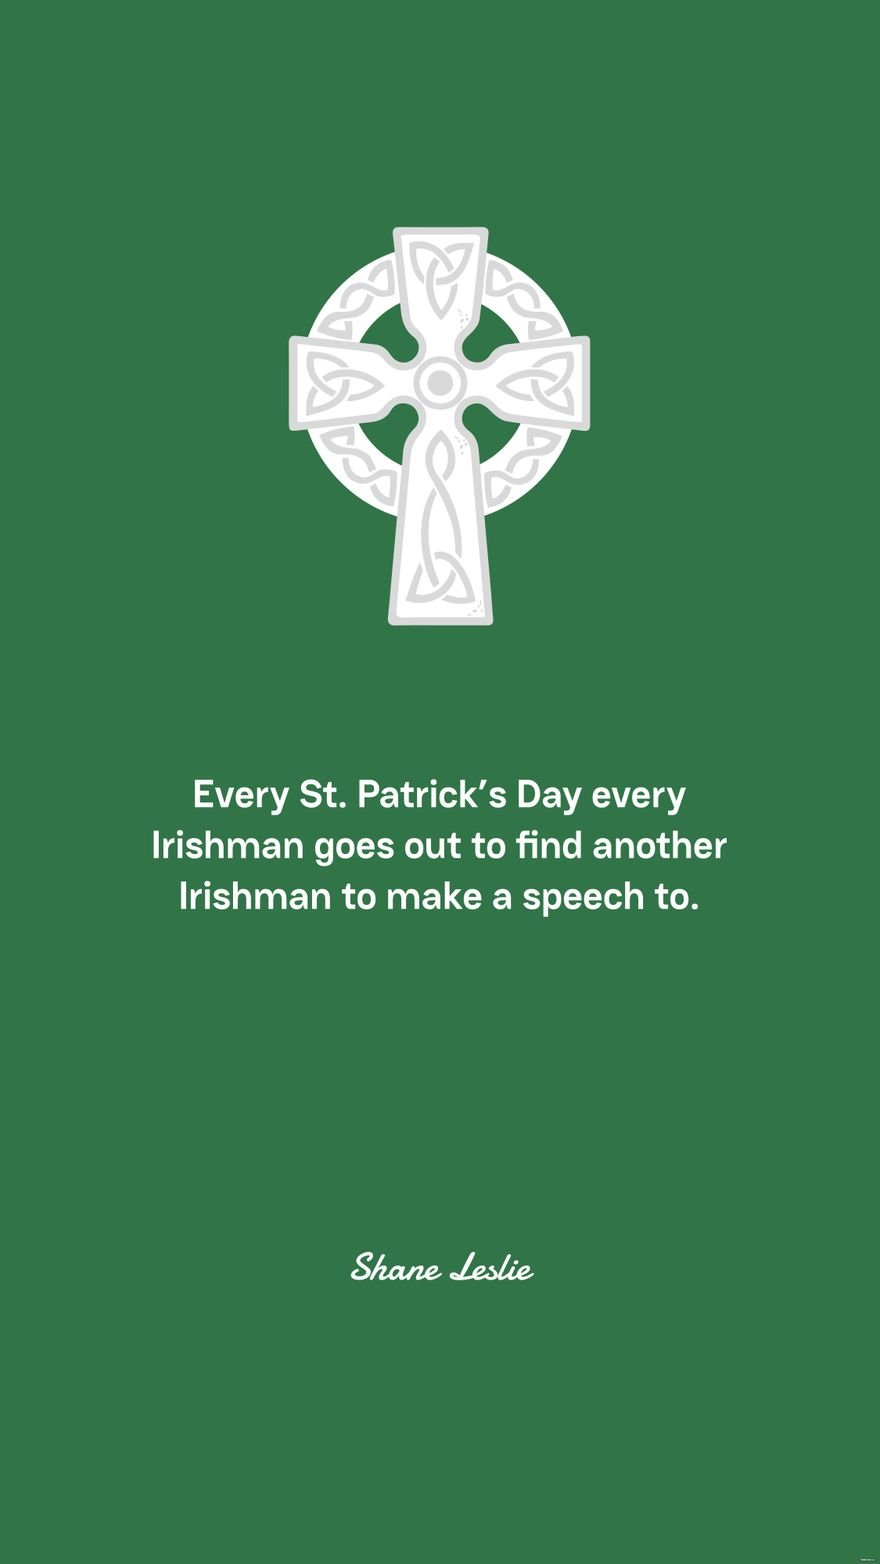 Shane Leslie - Every St. Patrick’s Day every Irishman goes out to find another Irishman to make a speech to. in JPEG